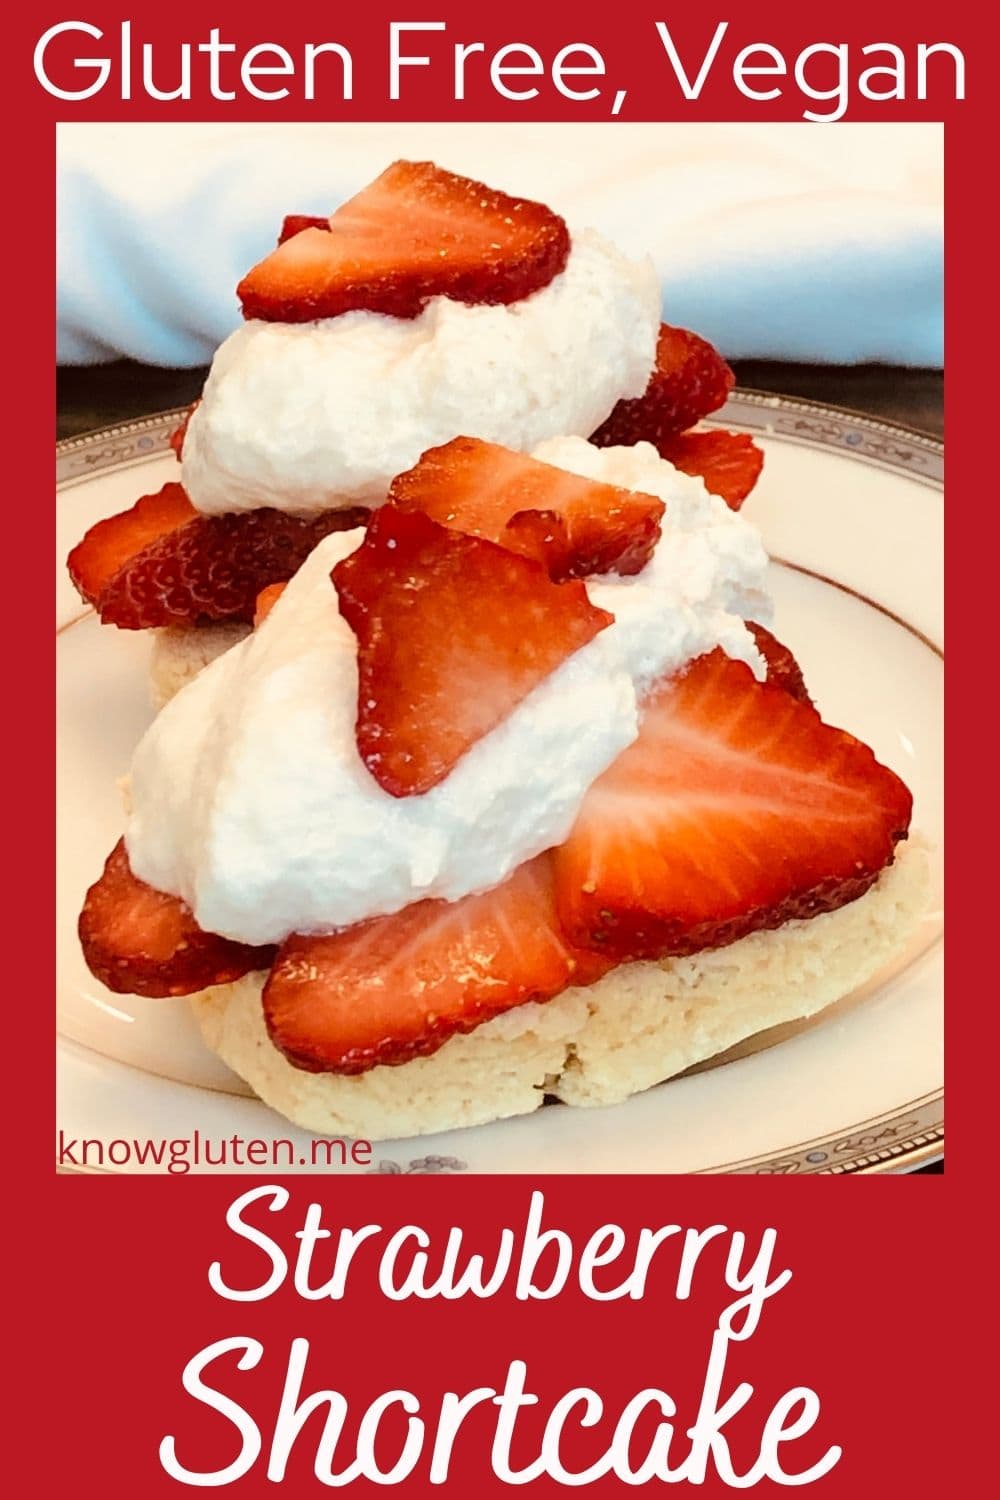 Two gluten free strawberry shortcakes on a china plate.